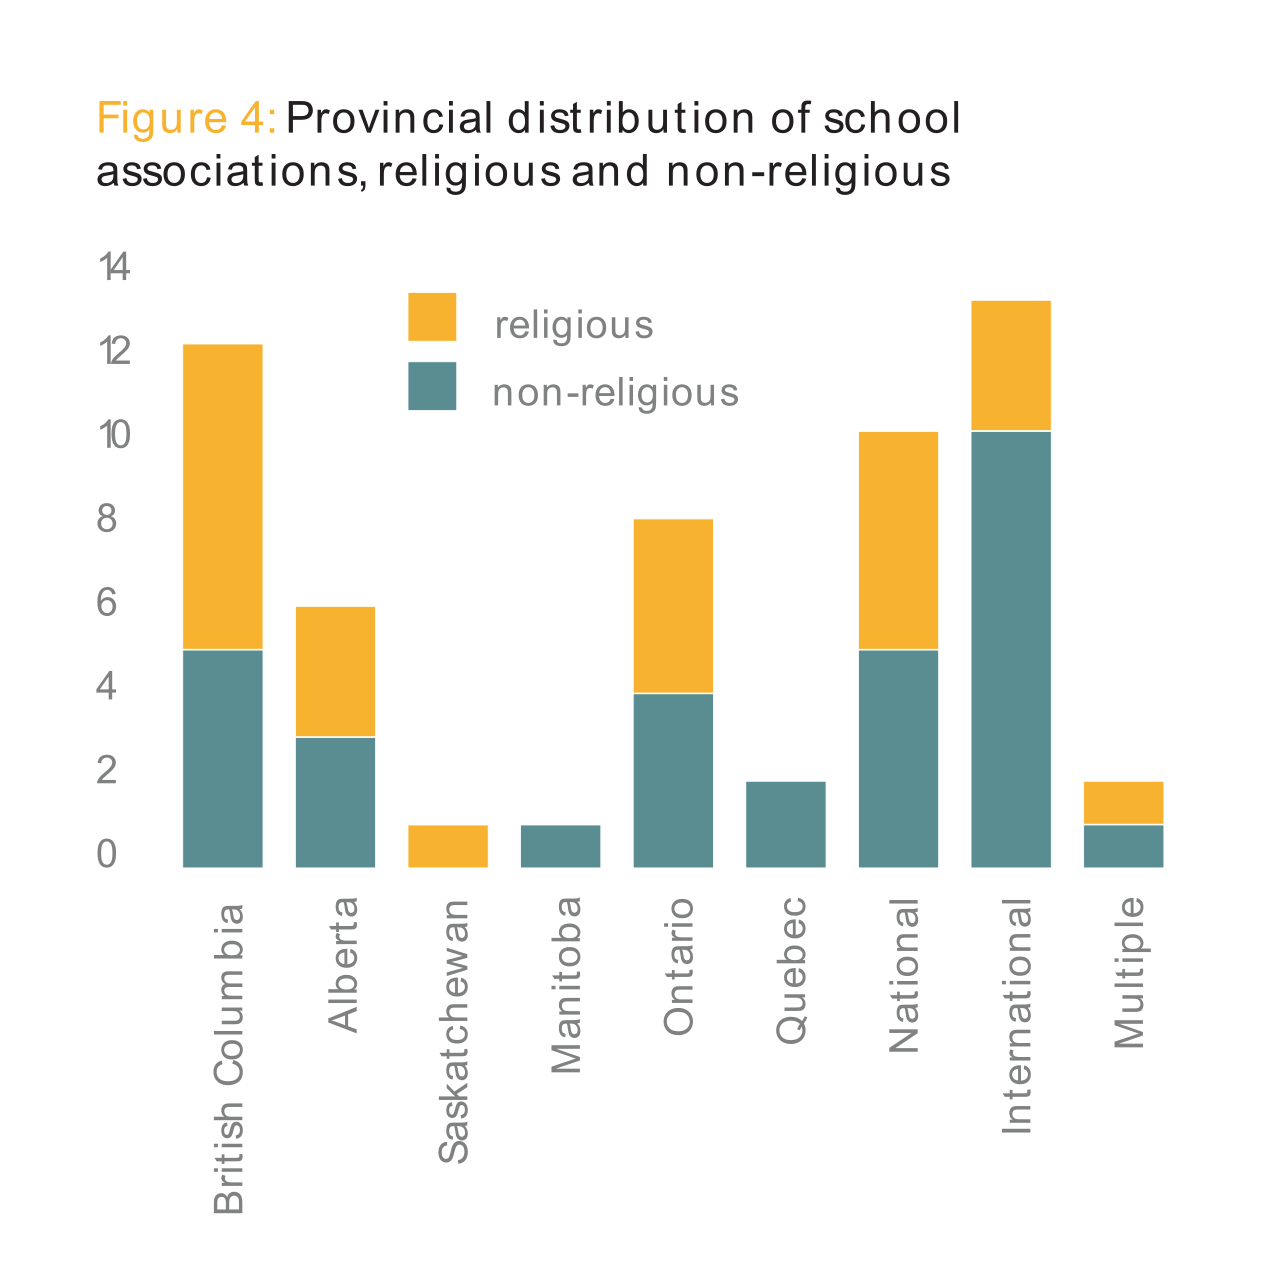 Figure 4: Provincial distribution of school associations, religious and non-religious